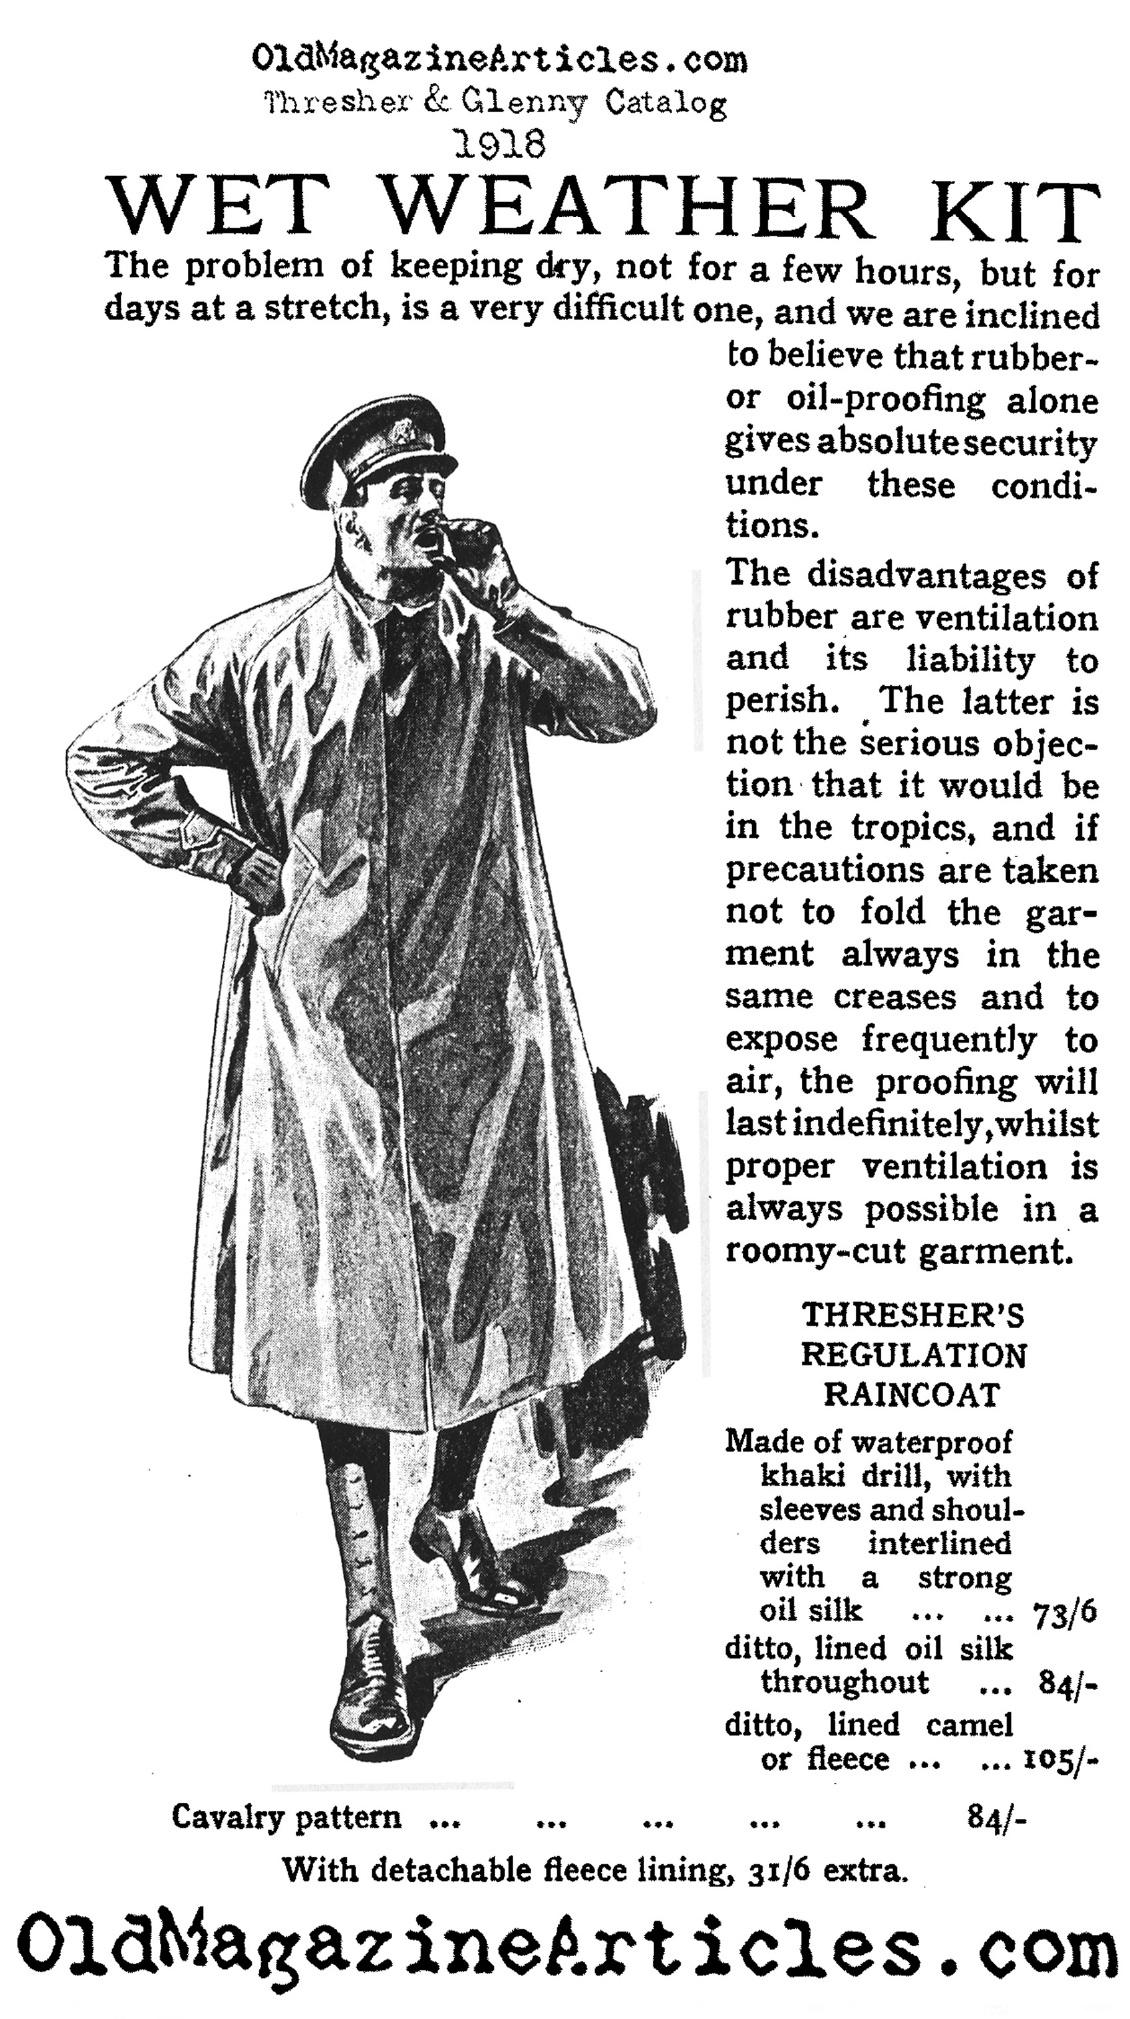 A British Officer's Private Purchase Raincoat (Thresher and Glenny Catalog, 1918)